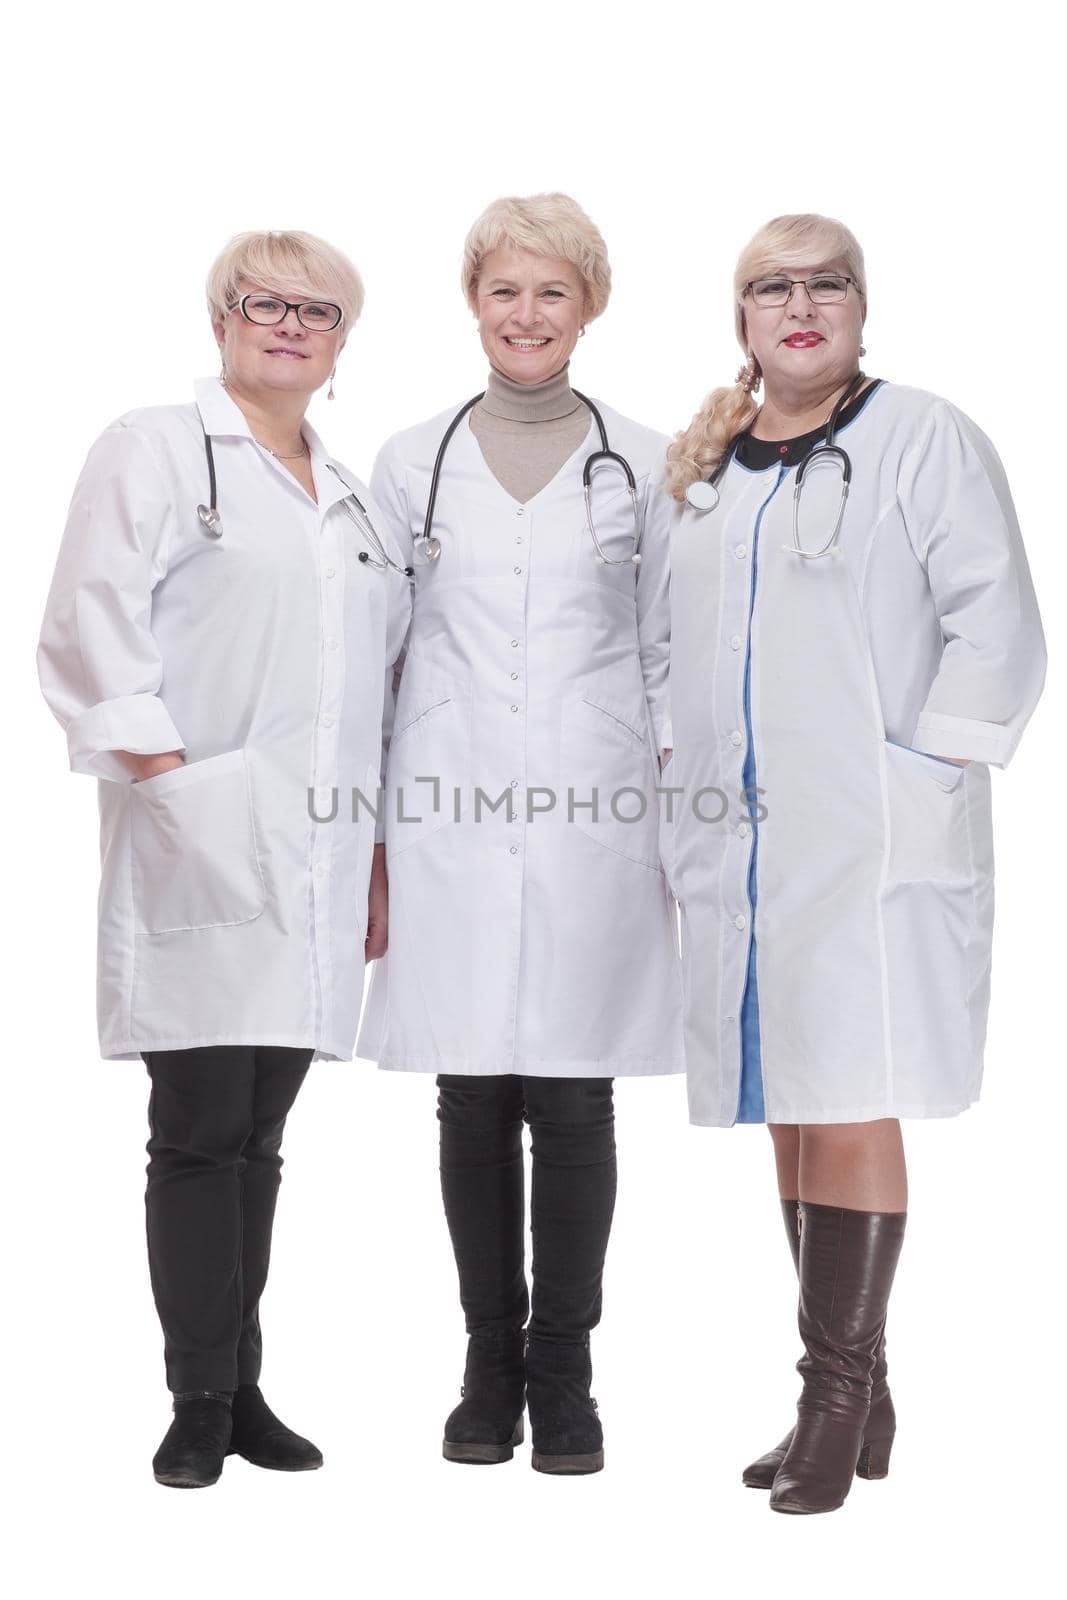 in full growth. group of qualified doctors standing together. isolated on a white background.